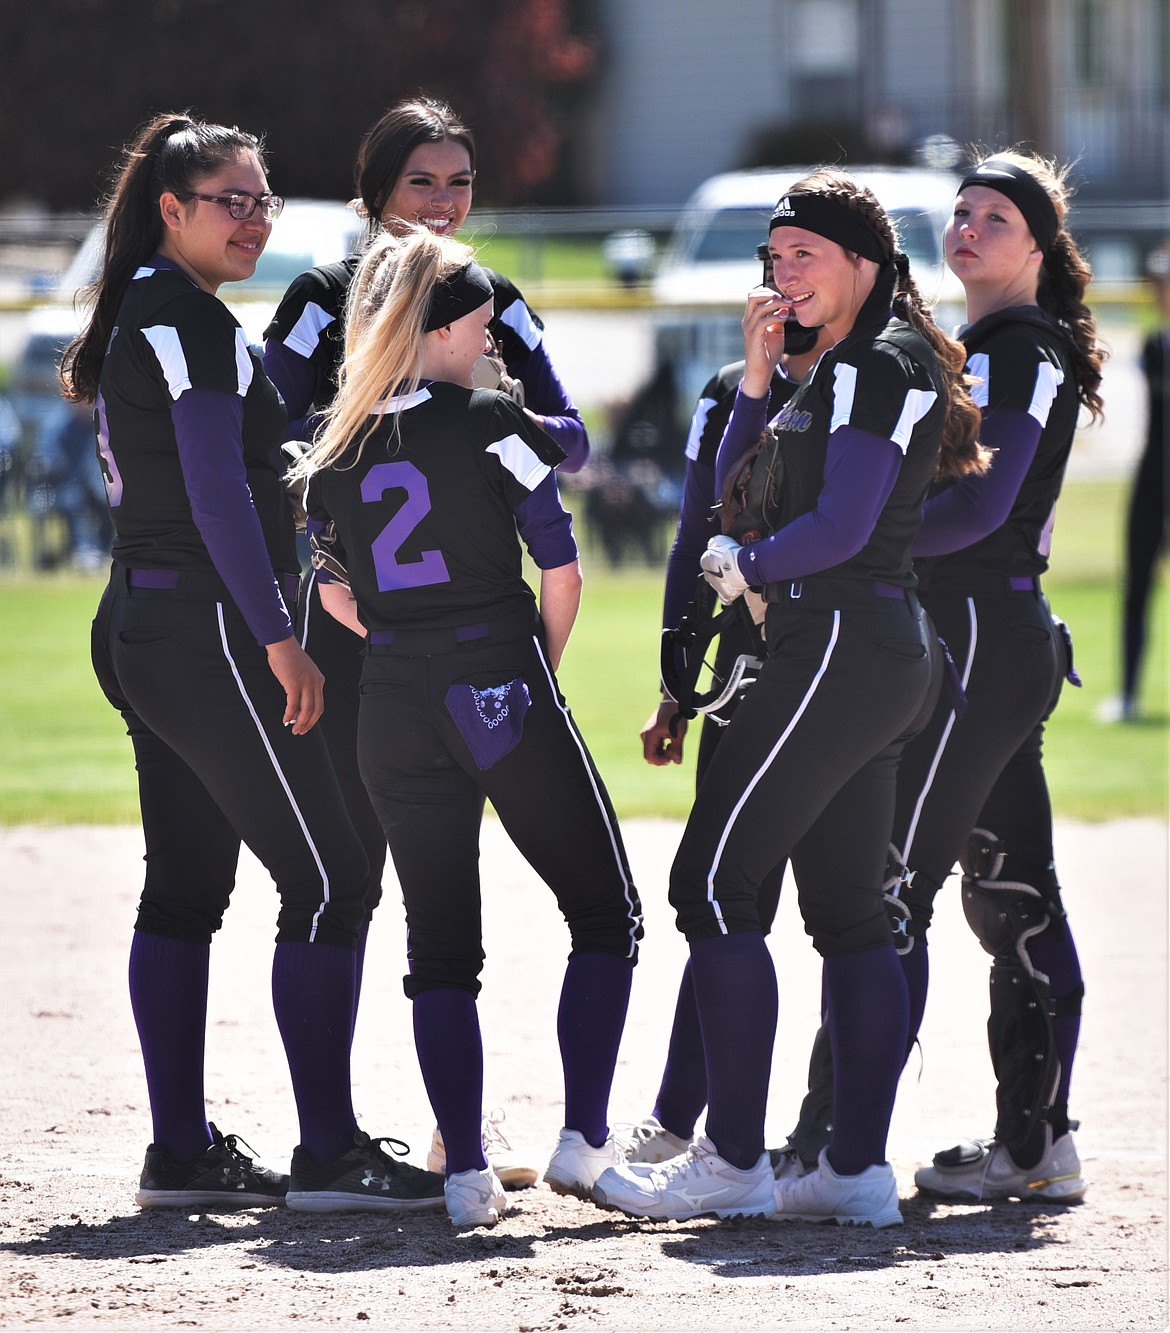 Junior pitcher Katelyne Druyvestein (2) meets at the mound with Polson's five seniors prior to the Libby game. From left: Mossy Kauley, Josie Caye, Druyvestein, SaVanna Carpentier (background), Kobbey Smith and Lexy Orien. (Scot Heisel/Lake County Leader)